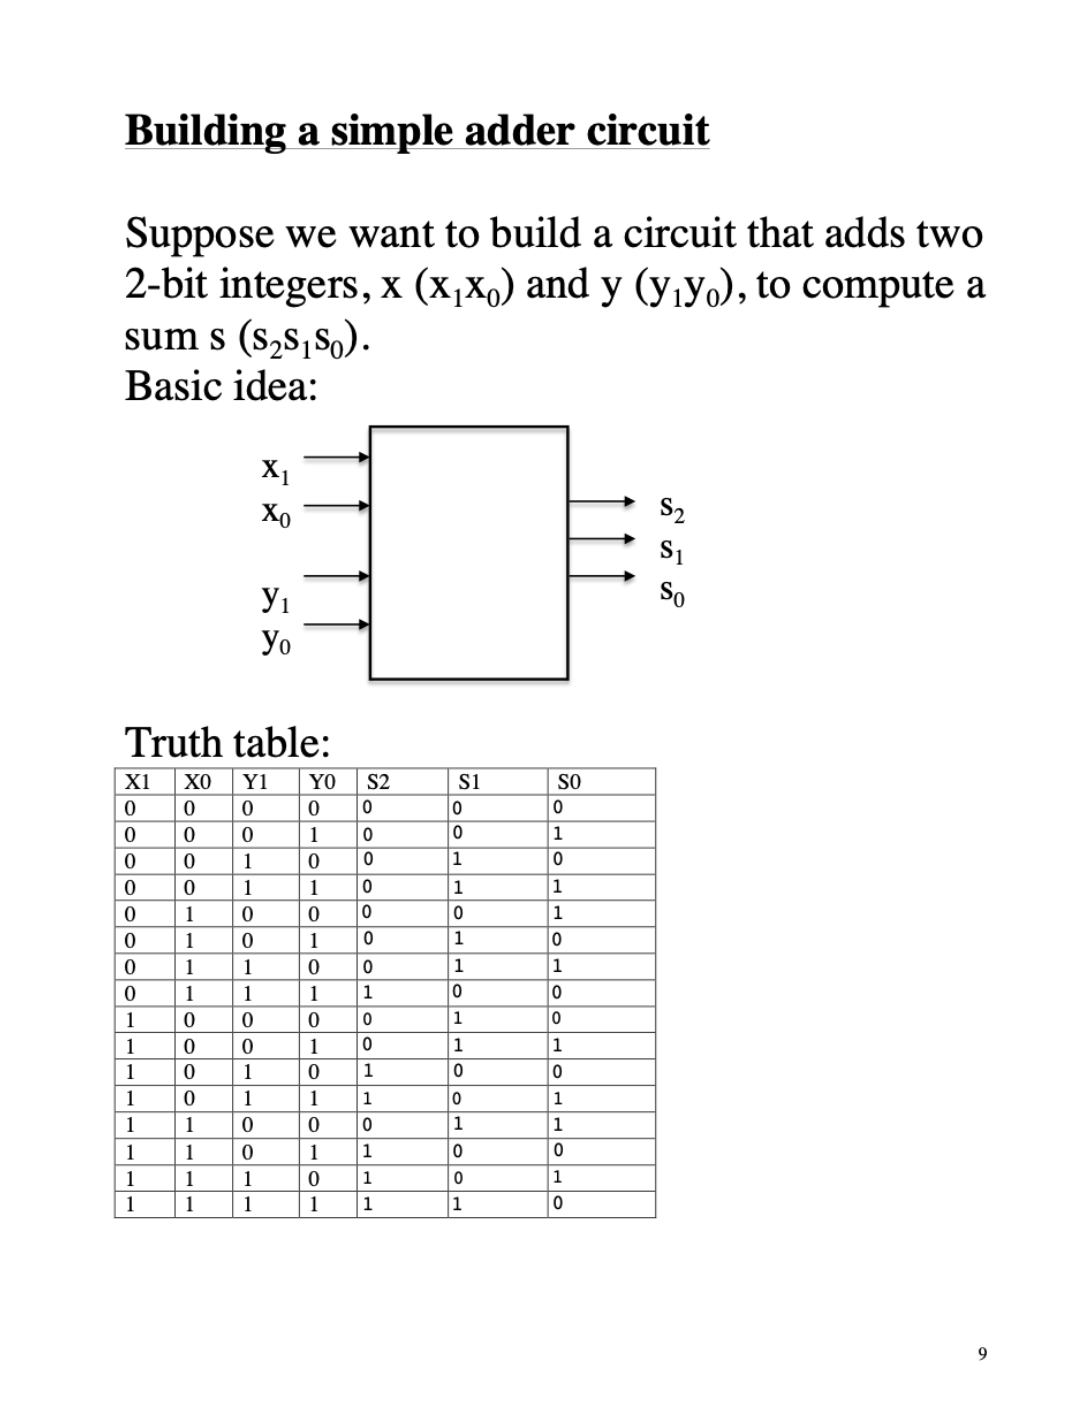 Building a simple adder circuit
Suppose we want to build a circuit that adds two
2-bit integers, x (x₁x) and y (y₁y), to compute a
sum s ($₂$₁$o).
Basic idea:
X1
0
0
0
0
0
0
0
0
n
1
1
1
1
1
1
1
1
X₁
Xo
У1
Truth table:
ΧΟ
Y1
0
0
0
0
0
1
0
1
1
0
1
0
1
1
1
1
0
0
0
0
0
1
0
1
1
0
1
0
1
1
1
1
Yo
YO
0
1
0
1
0
1
0
0 0
1
1
0
1
0
1
0
1
0
1
S2
0
0
0
0
0
0
0
1
1
0
1
1
1
S1
0
0
1
1
0
1
1
0
1
1
0
0
1
0
0
1
SO
0
1
0
1
1
0
1
0
0
1
0
1
1
0
1
0
S₂
S₁
So
9